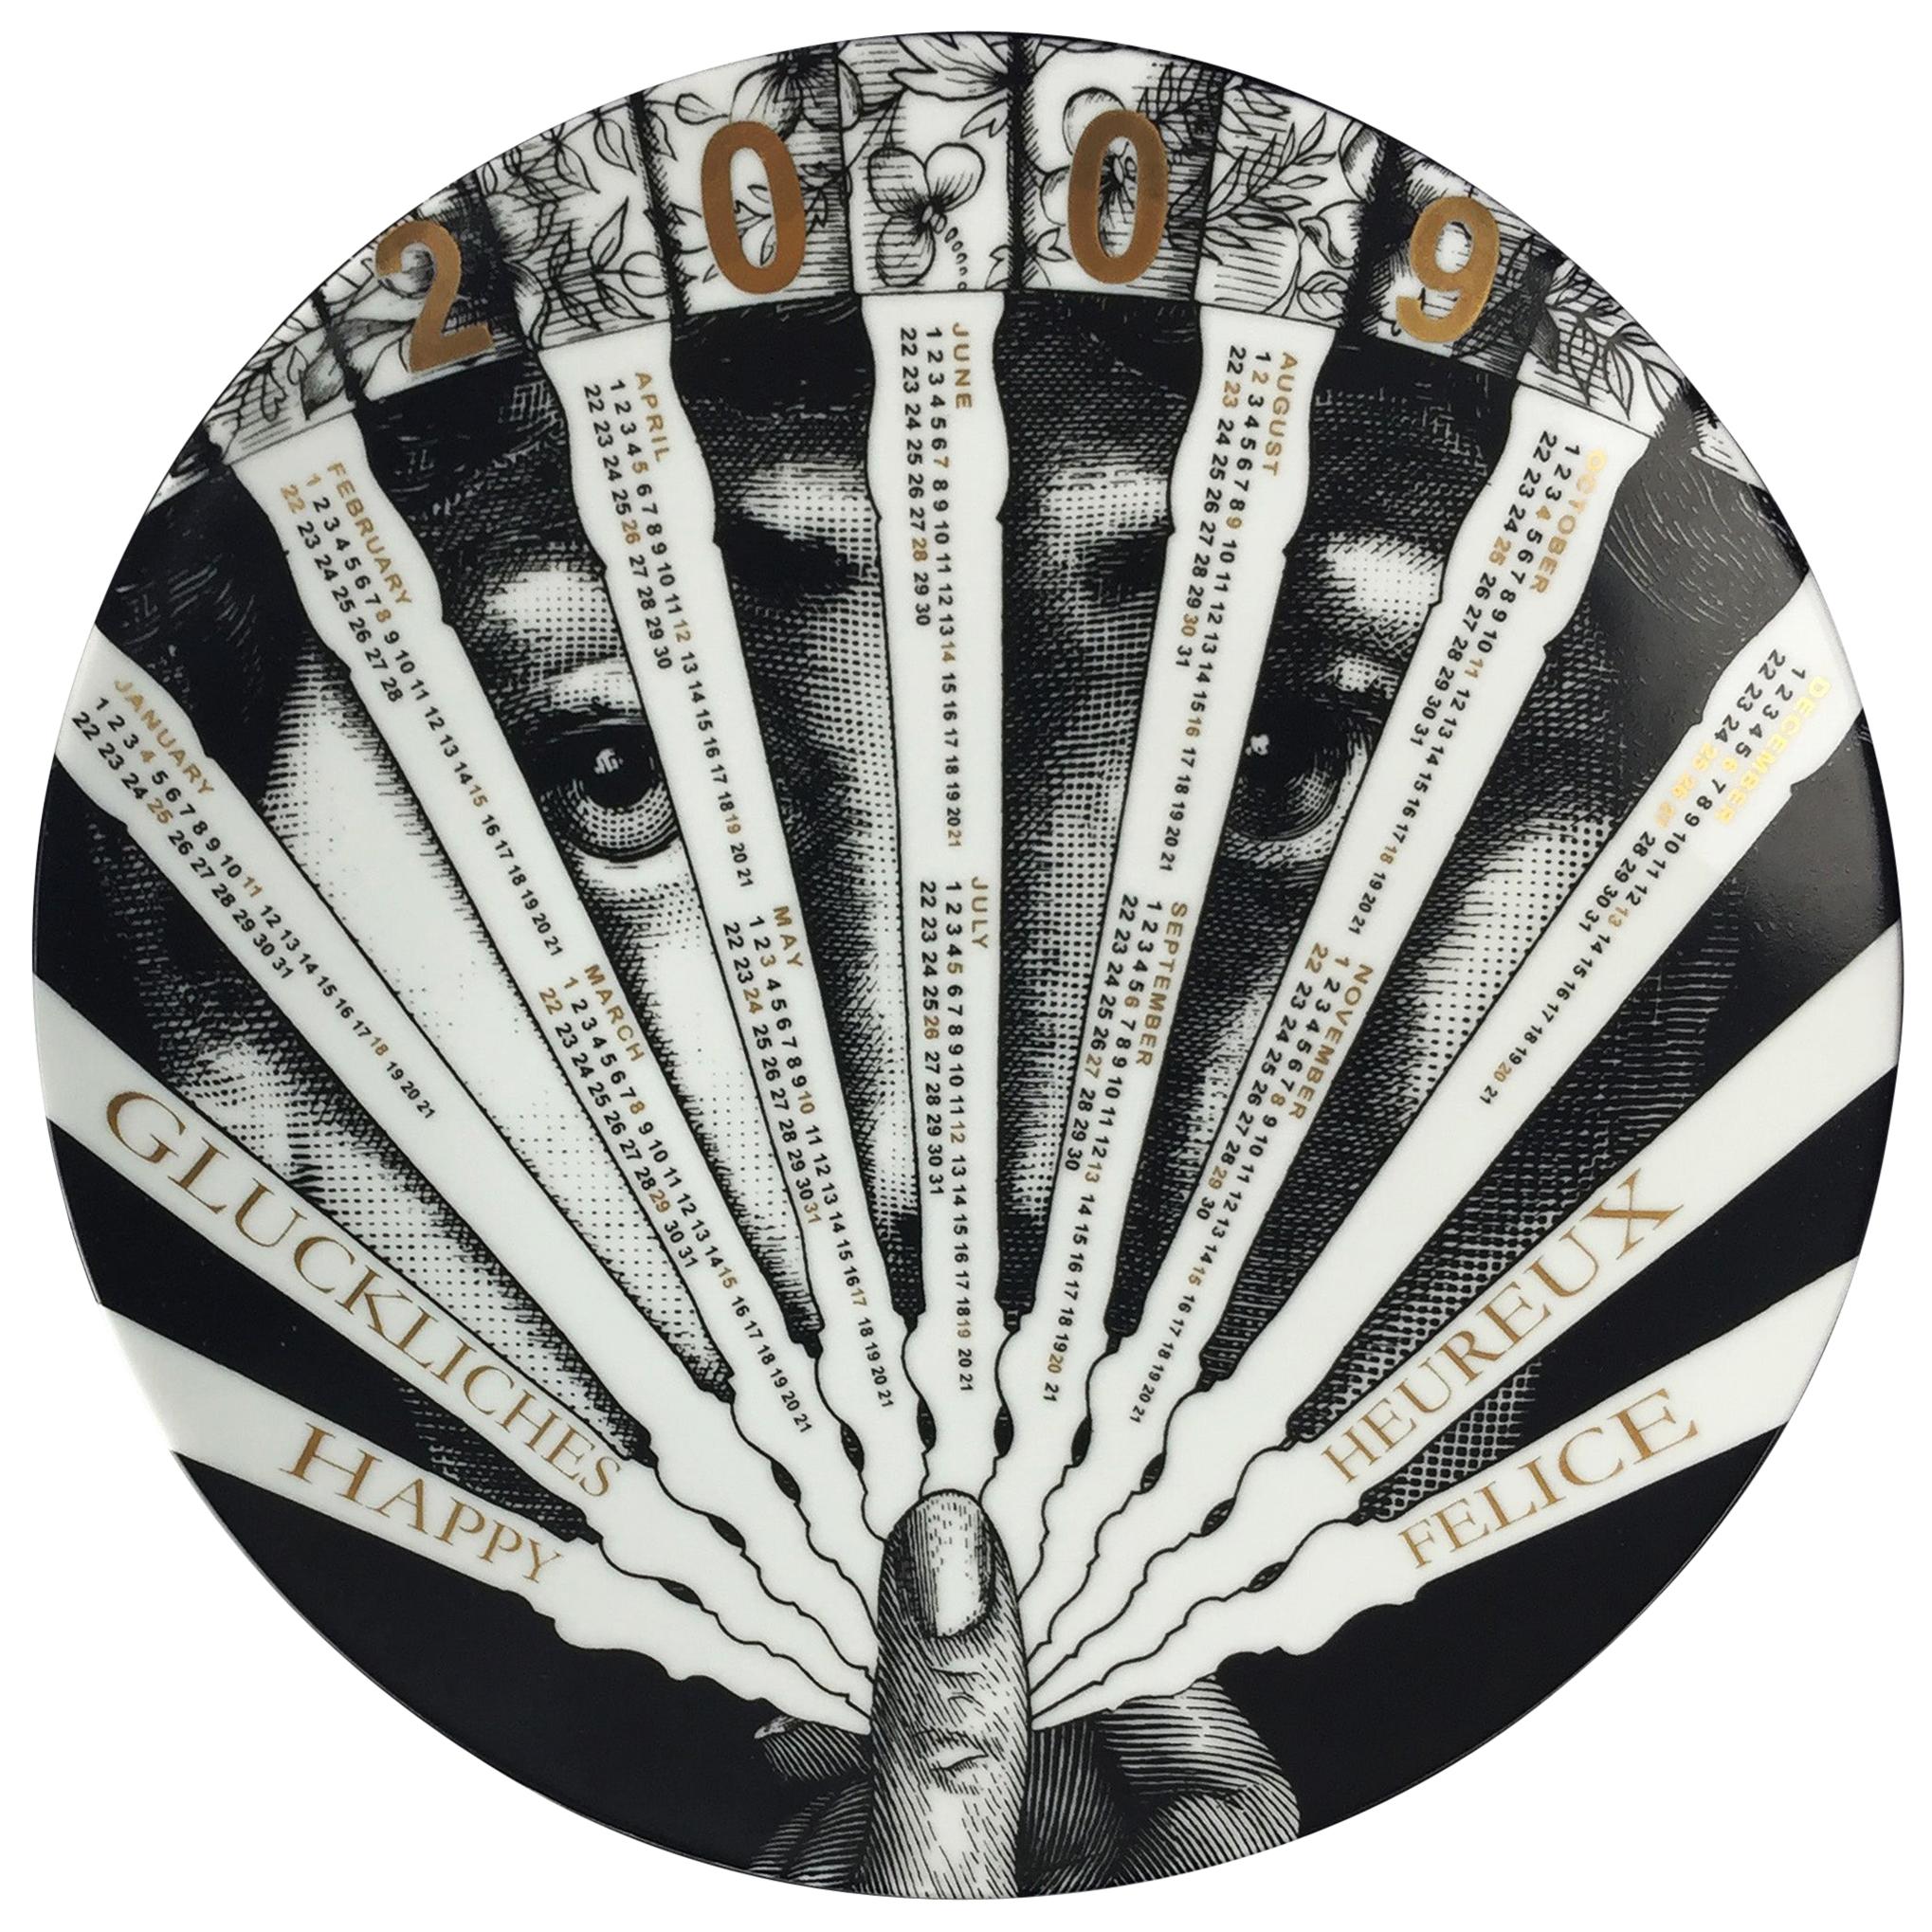 Fornasetti Limited Edition Ceramic Calendar Plate for 2009  No. 413/700 For Sale